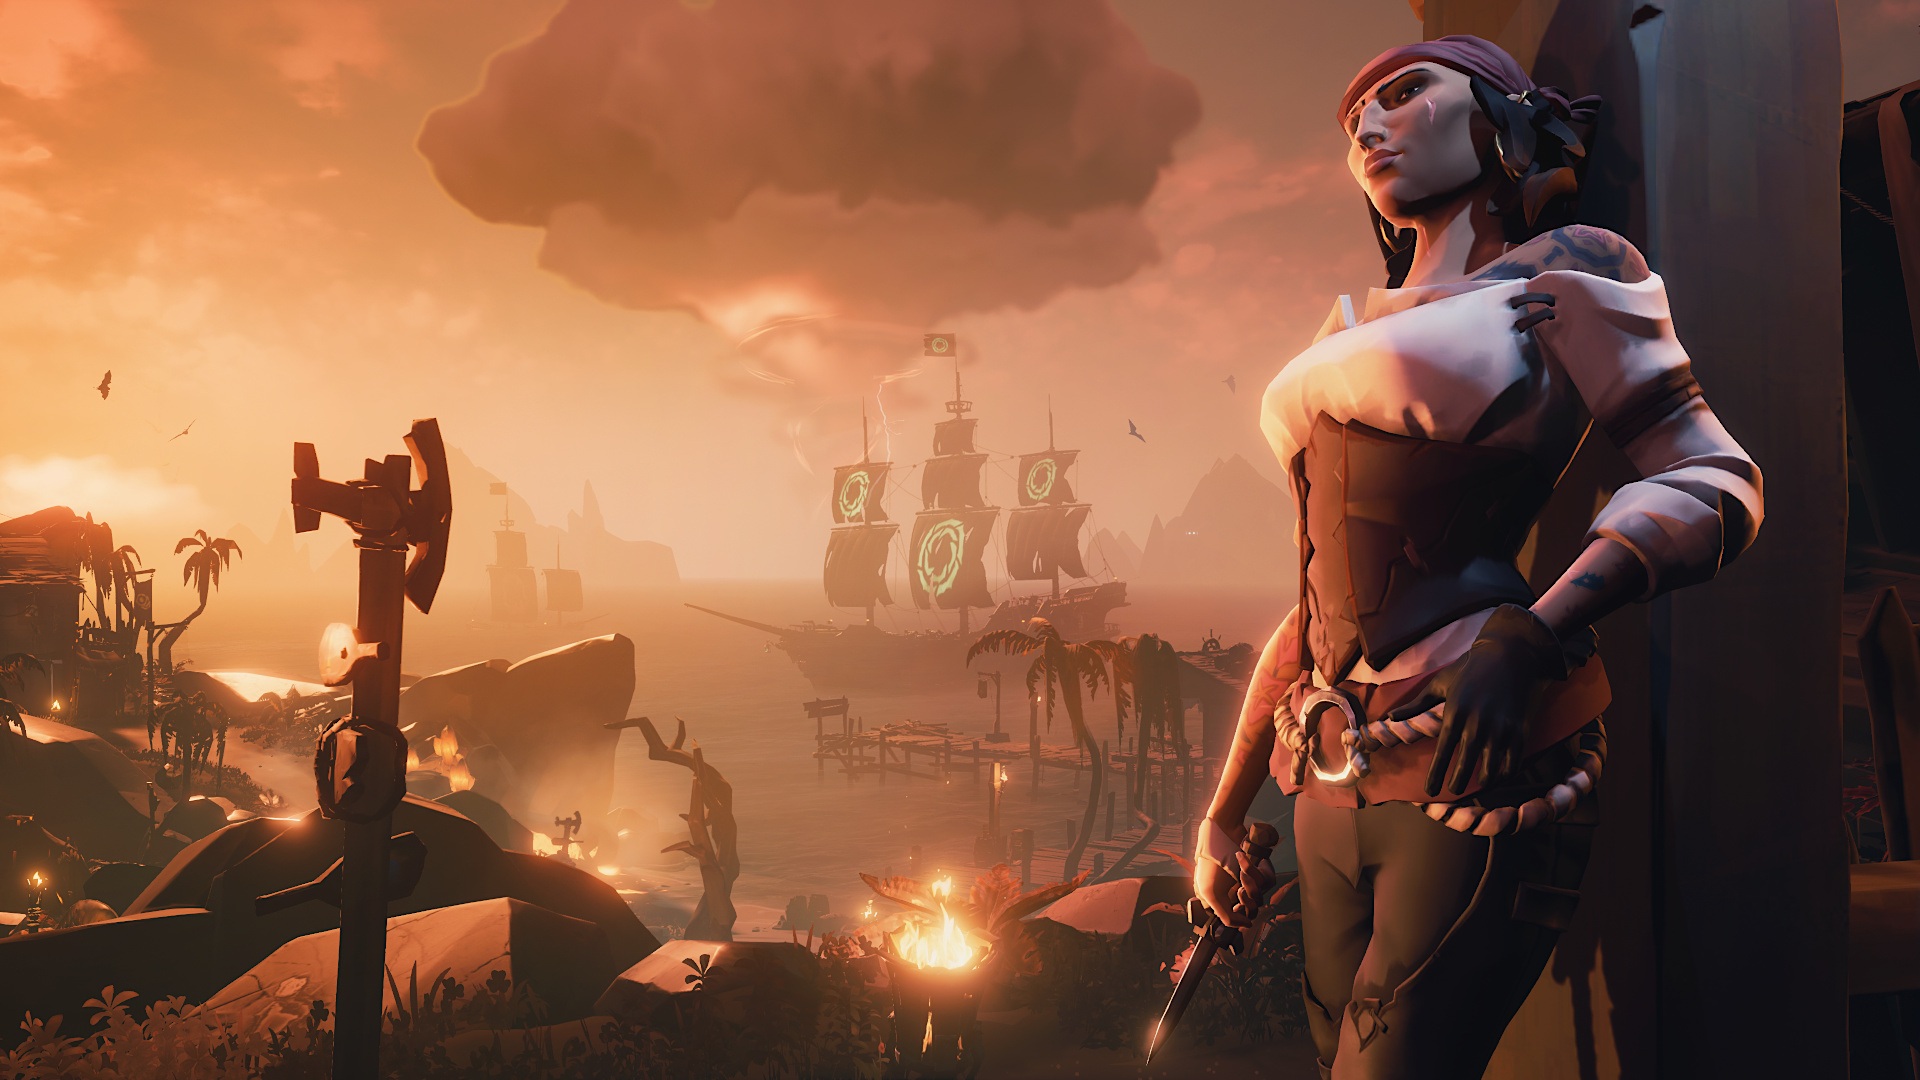 Sea of Thieves on X Weve whipped up a pair of wicked wallpapers in both  desktop and mobile formats to give your screens some supernatural Sea of  Thieves style heading into the